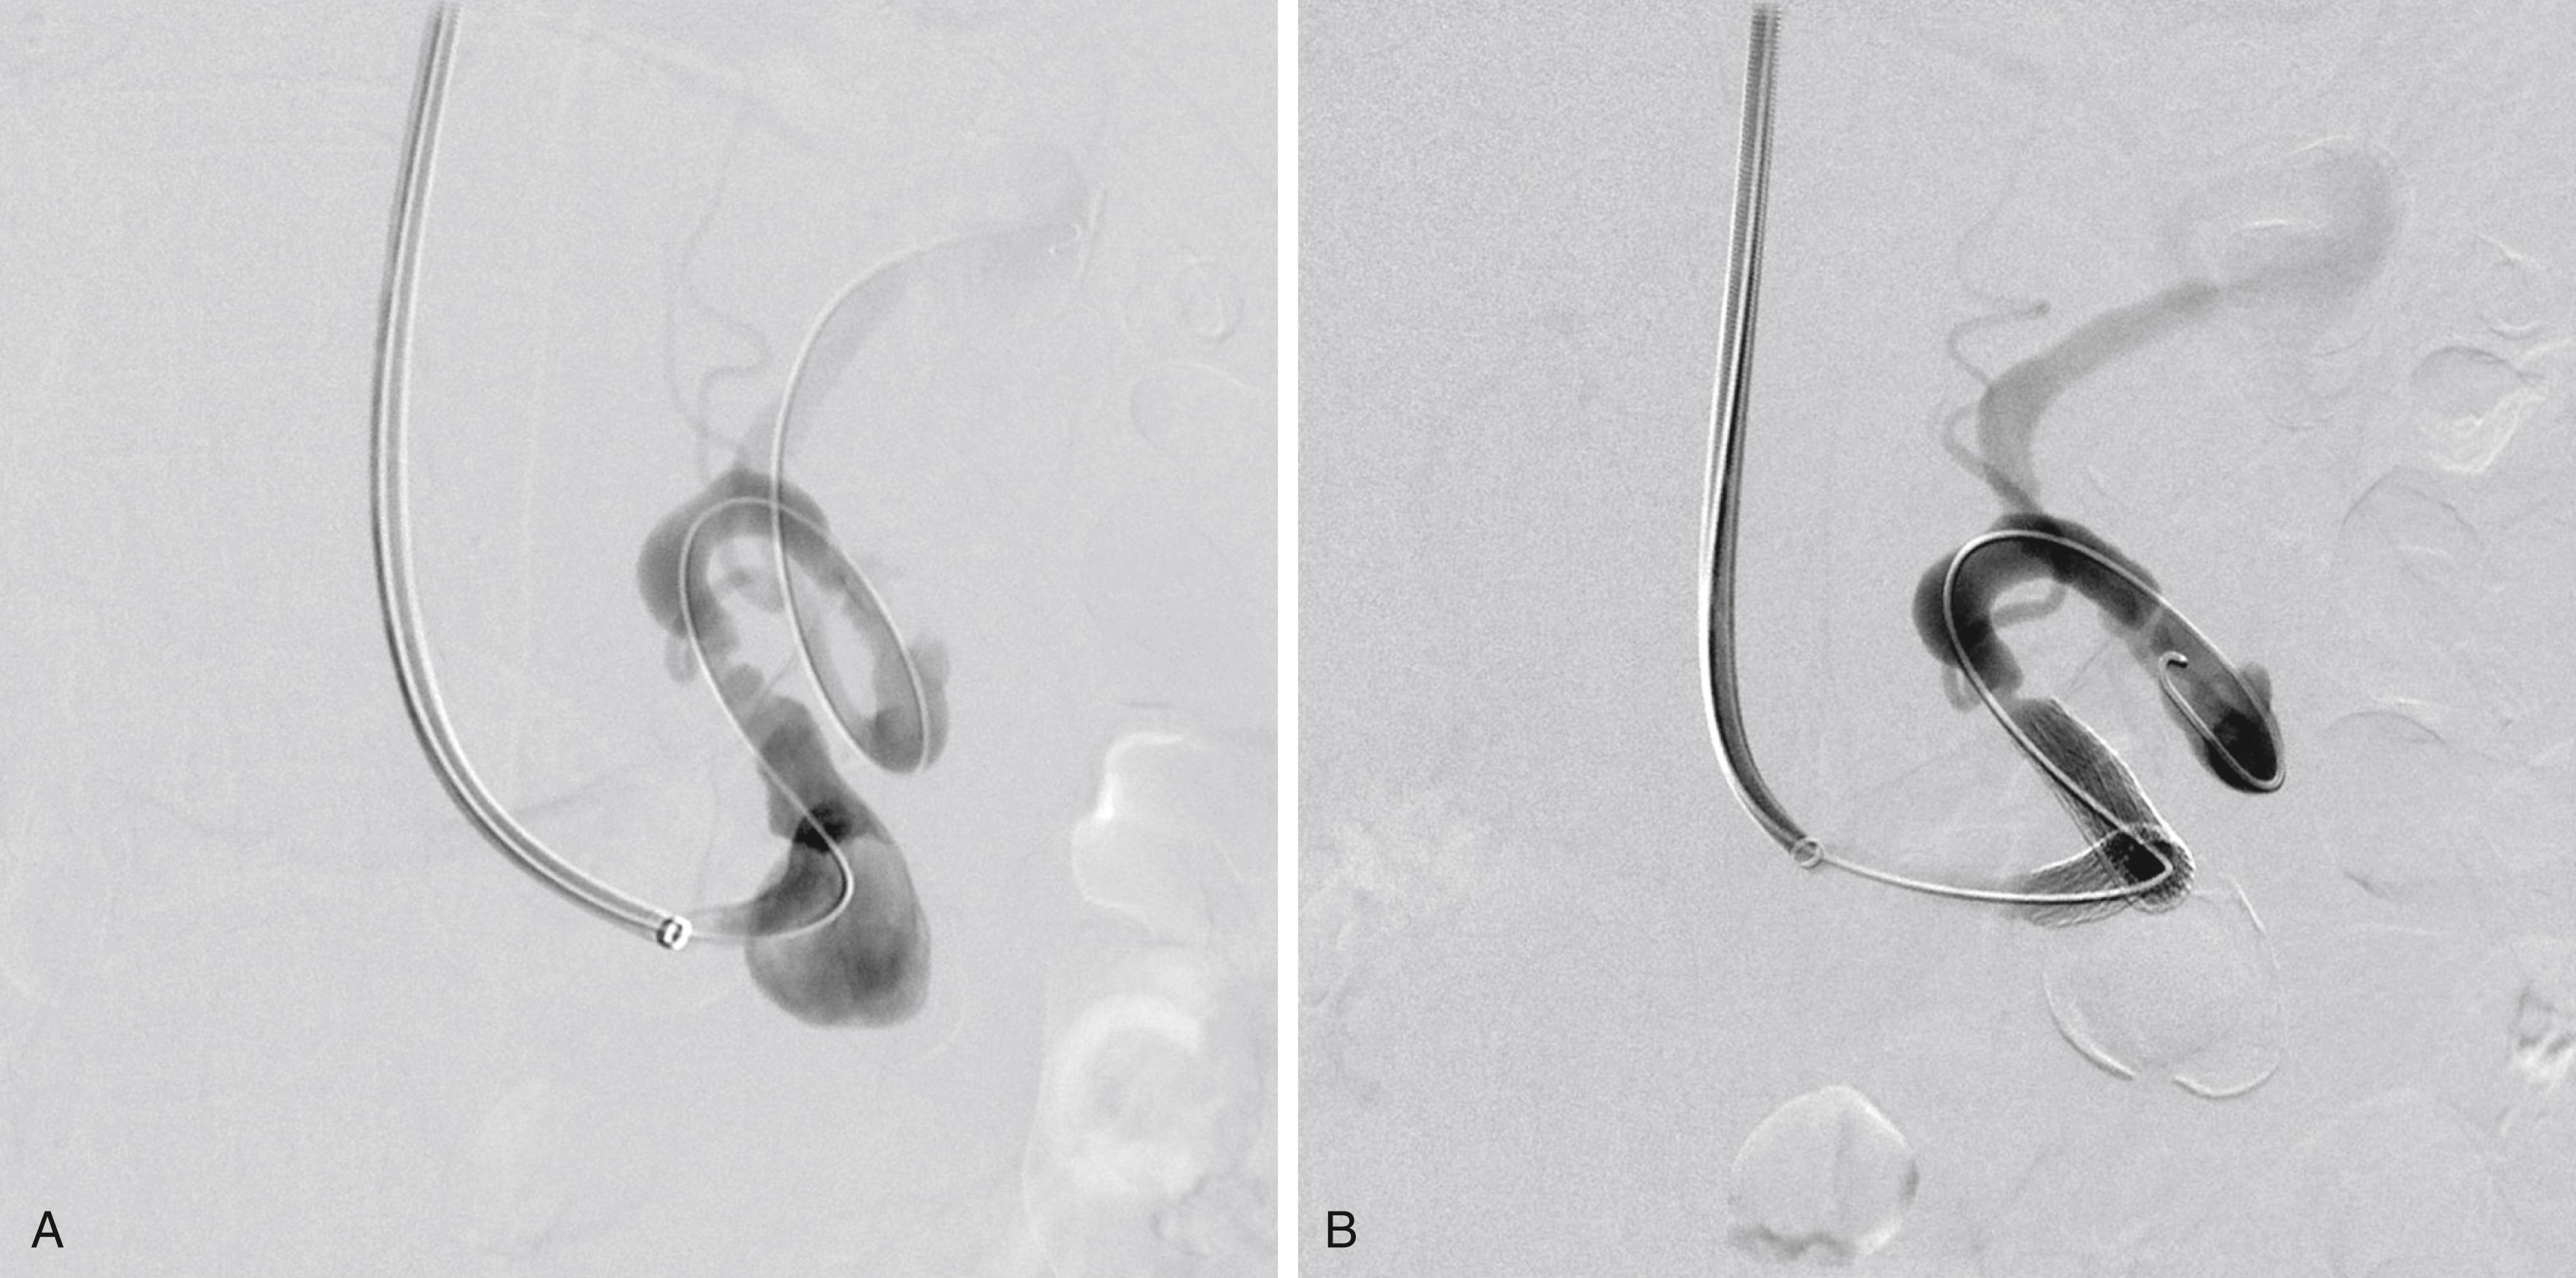 Figure 87.3, ( A ) Angiogram of a 2-cm splenic artery aneurysm prior to intervention. ( B ) Post-intervention angiogram. Aneurysm excluded with covered stent. Post-deployment imaging demonstrates intact flow to end organ.